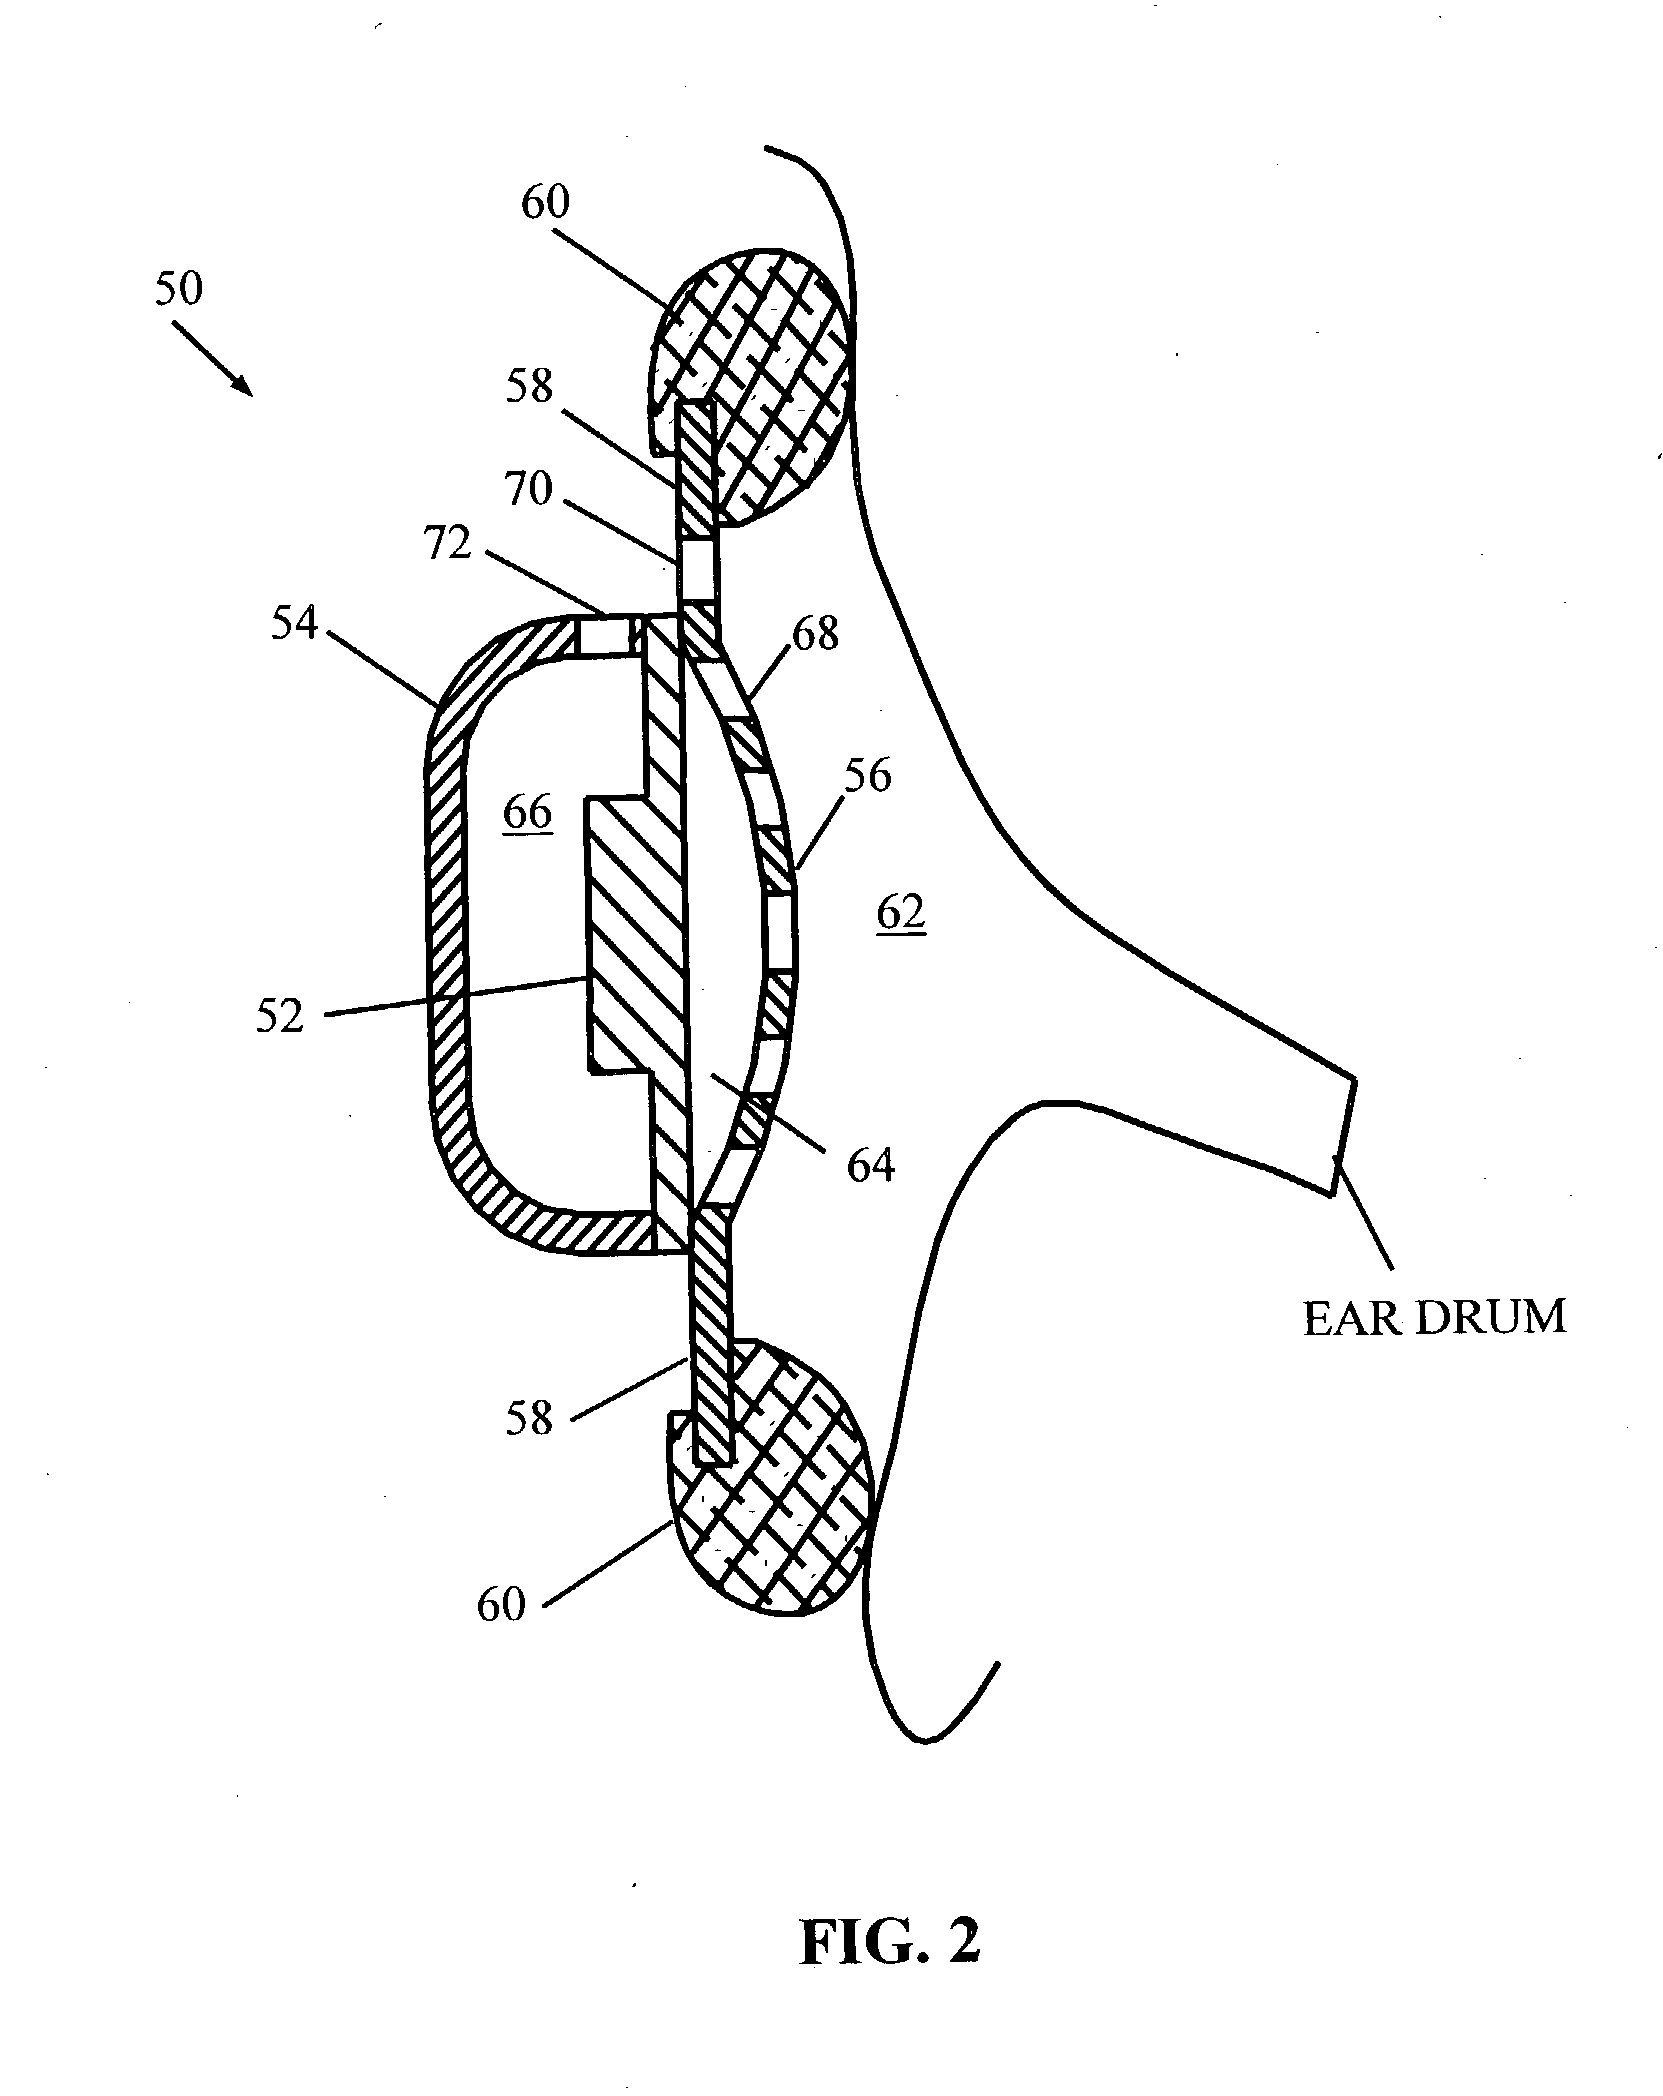 Personal communication method and apparatus with reduced audio leakage